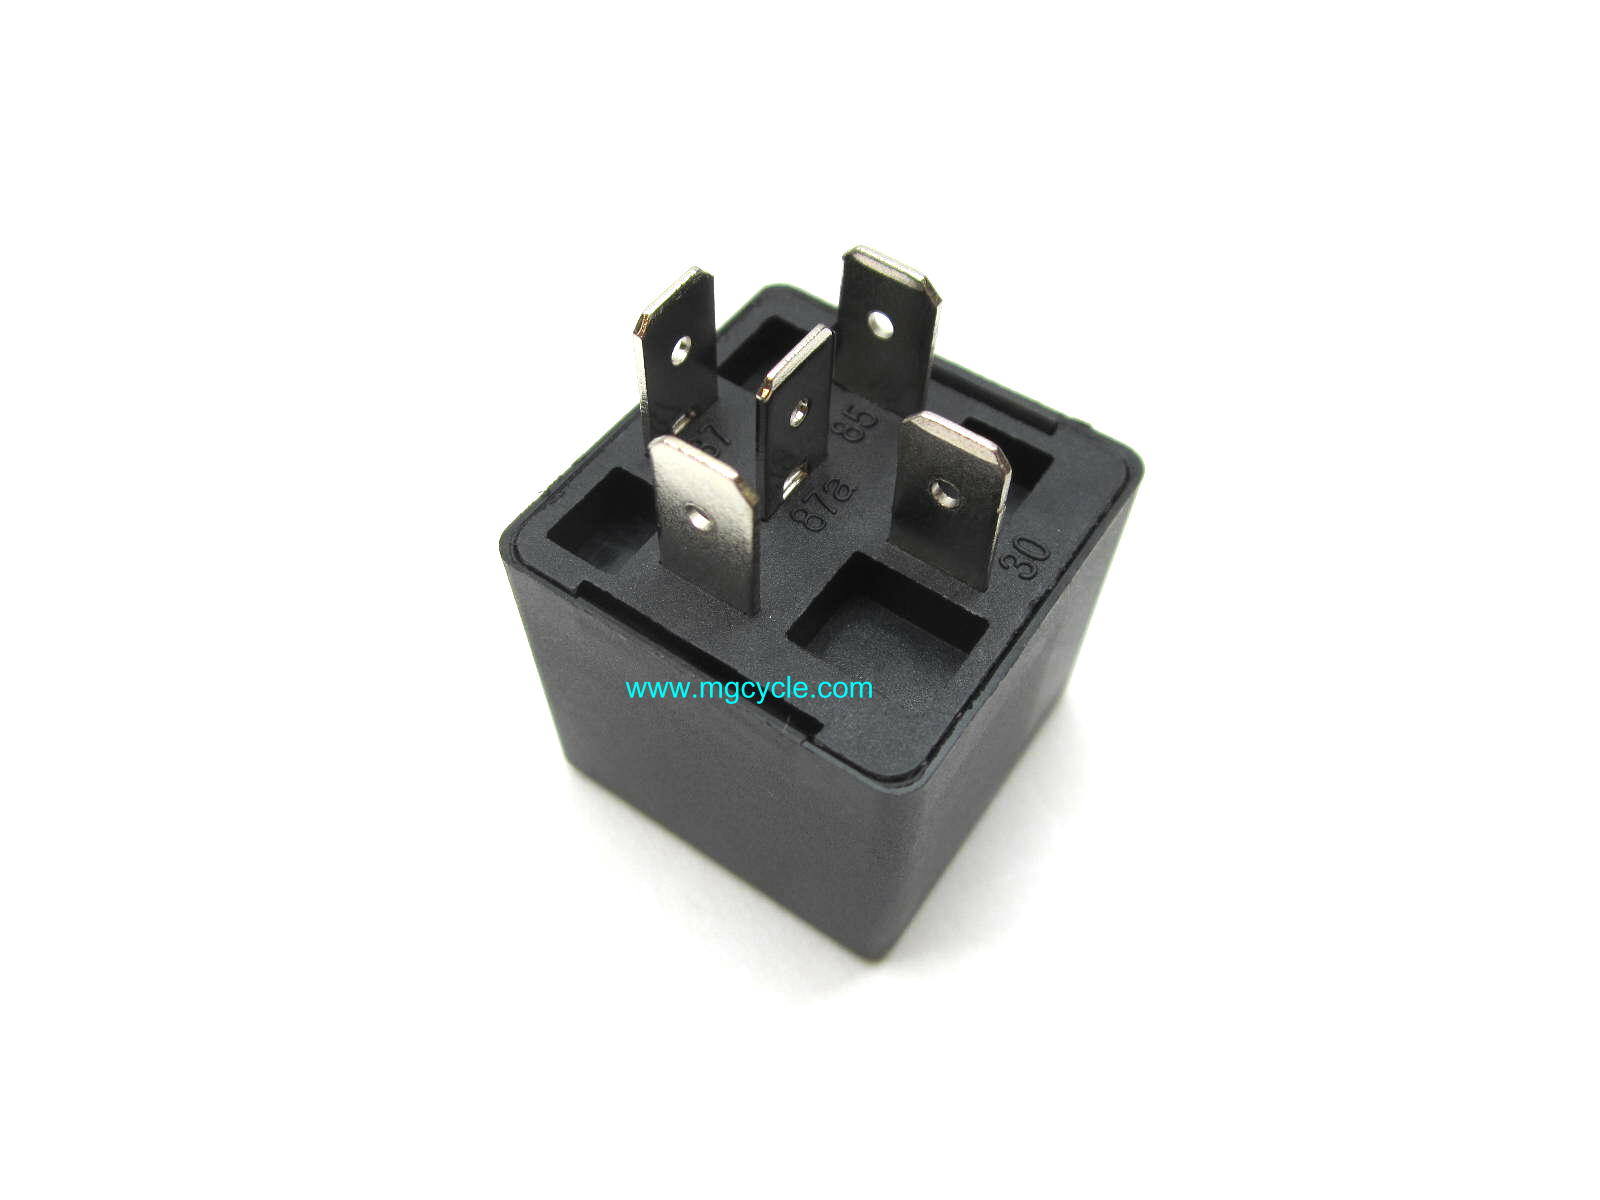 Starter relay 5 pin 12V40A cube LM4/5 Cal3 Mille 1000S SP3